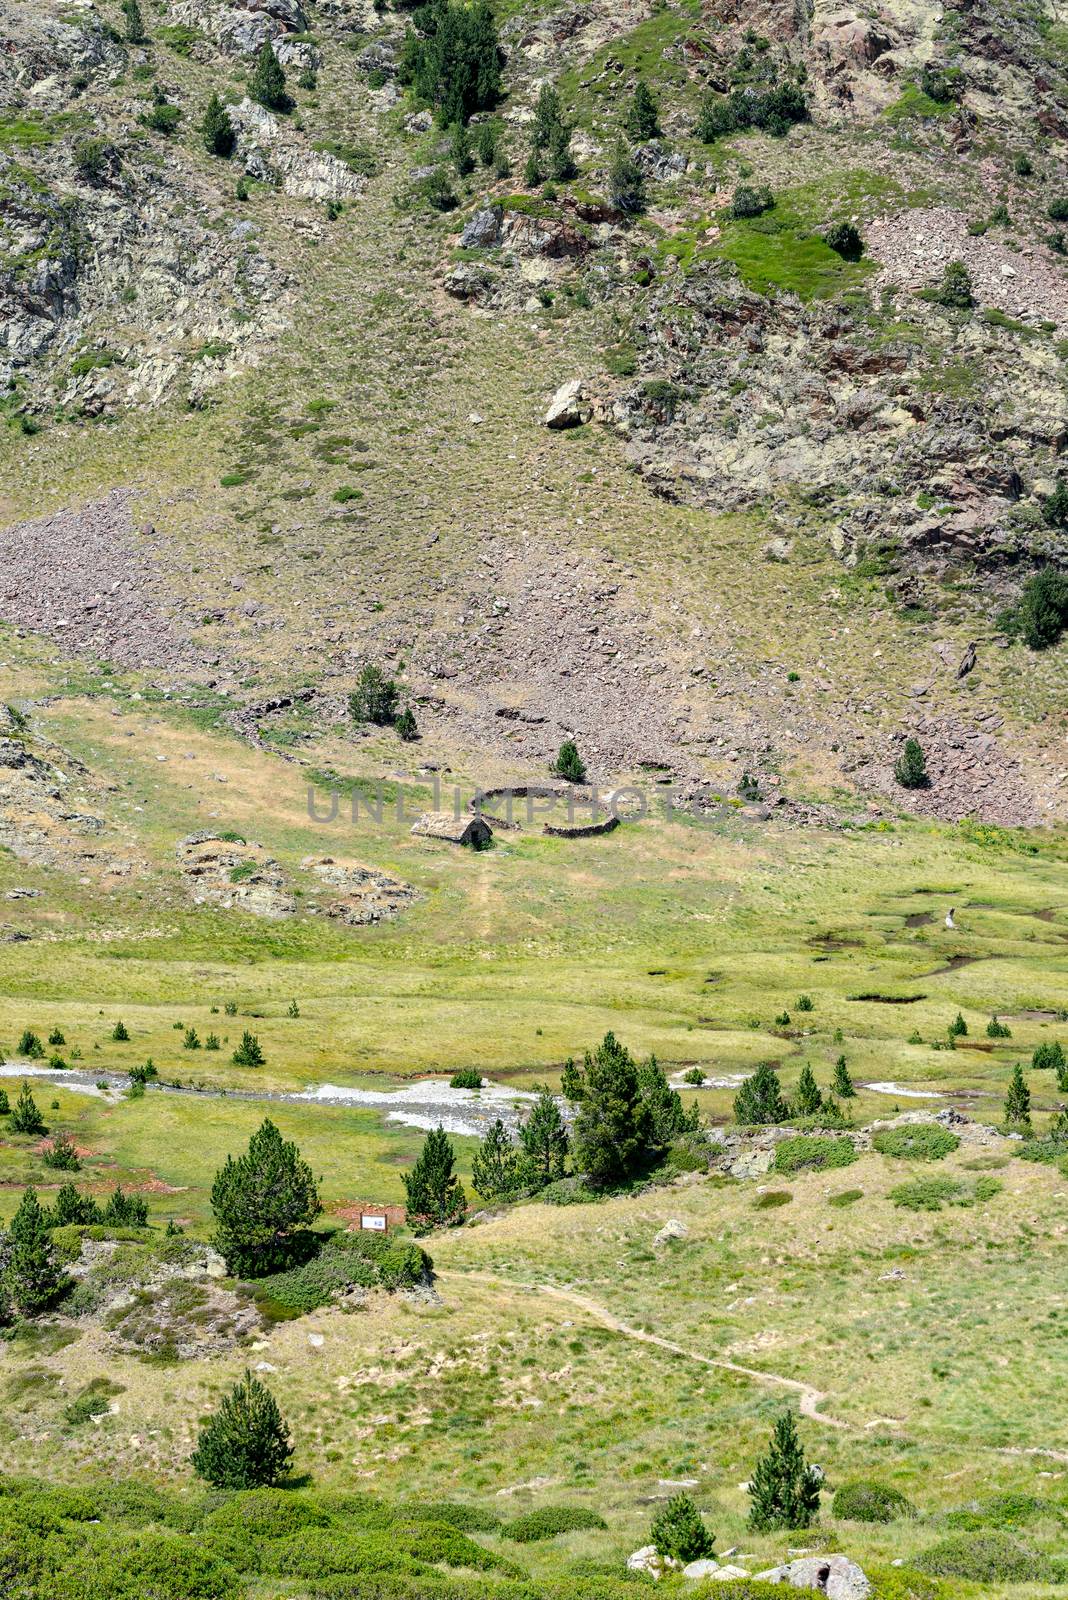 Country house in the Coma Pedrosa Refuge at 2266 meters of altitude in Andorra Pyrenees in summer 2020.